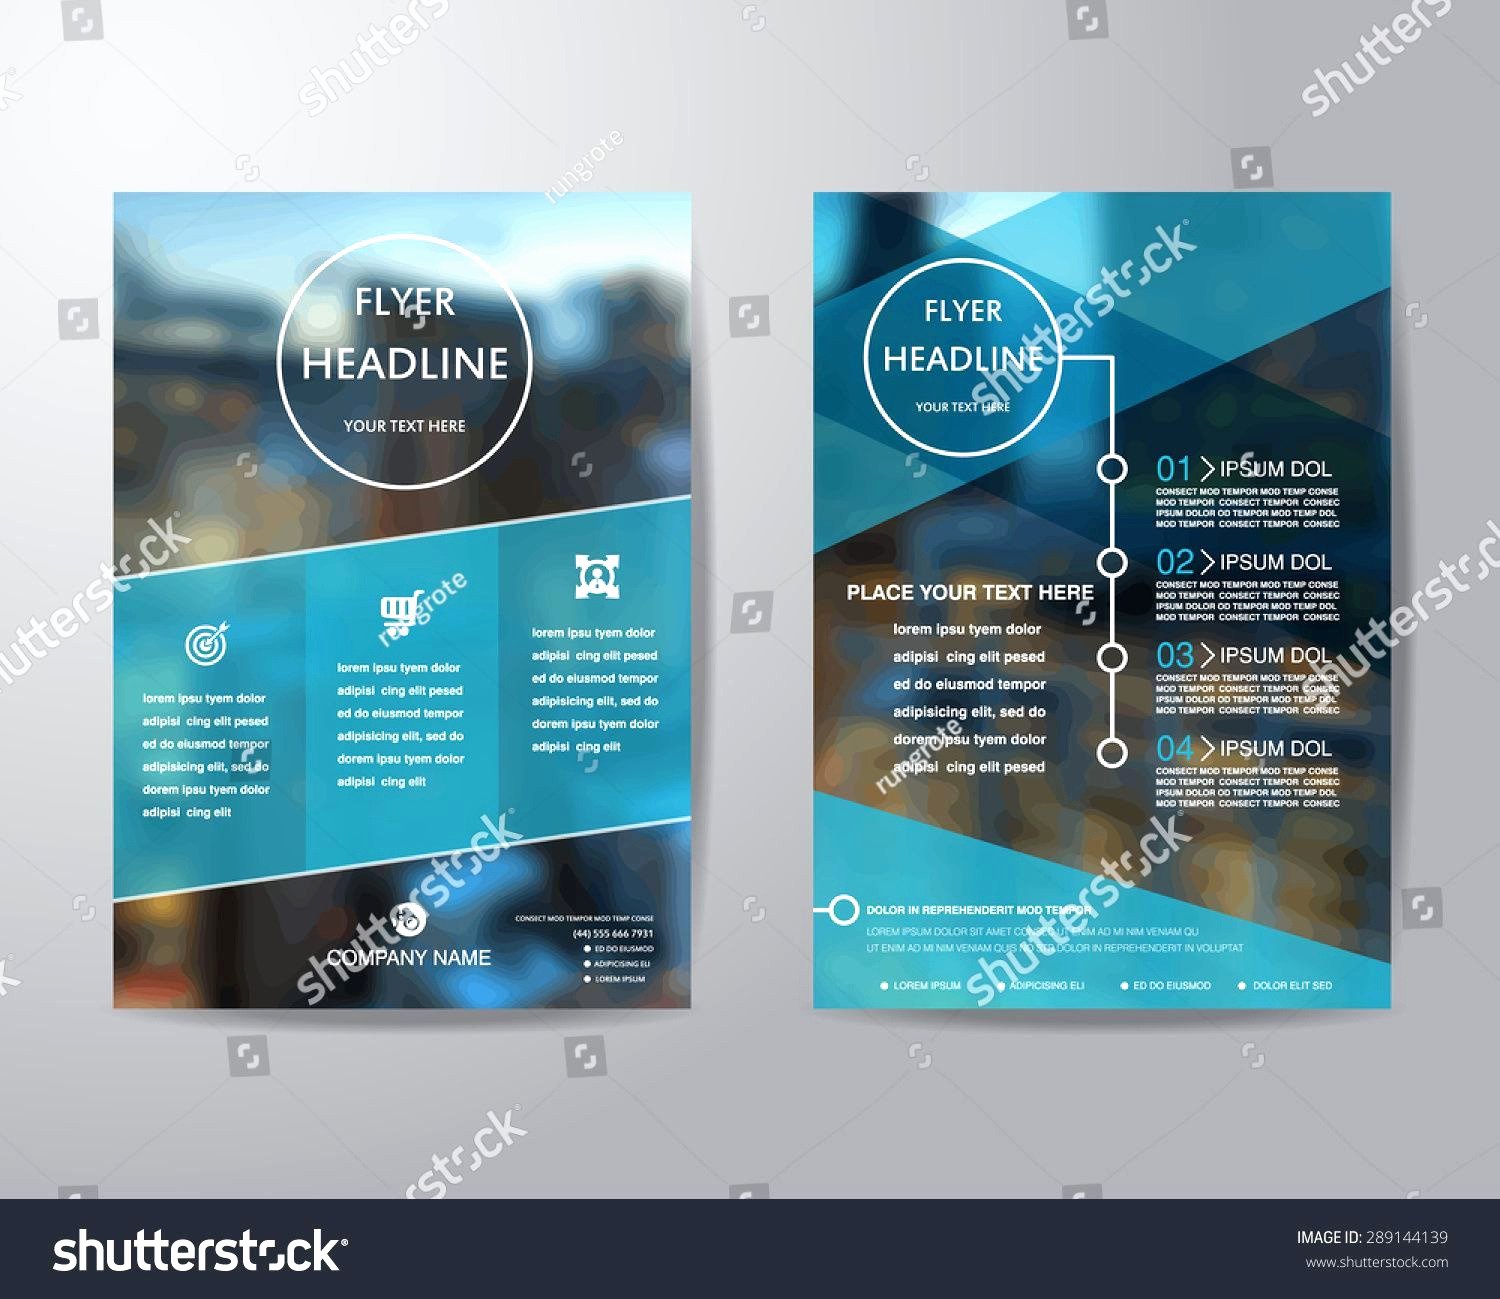 Retractable Banner Template Psd Lovely 33 Retractable Banner Design Templates New Templates